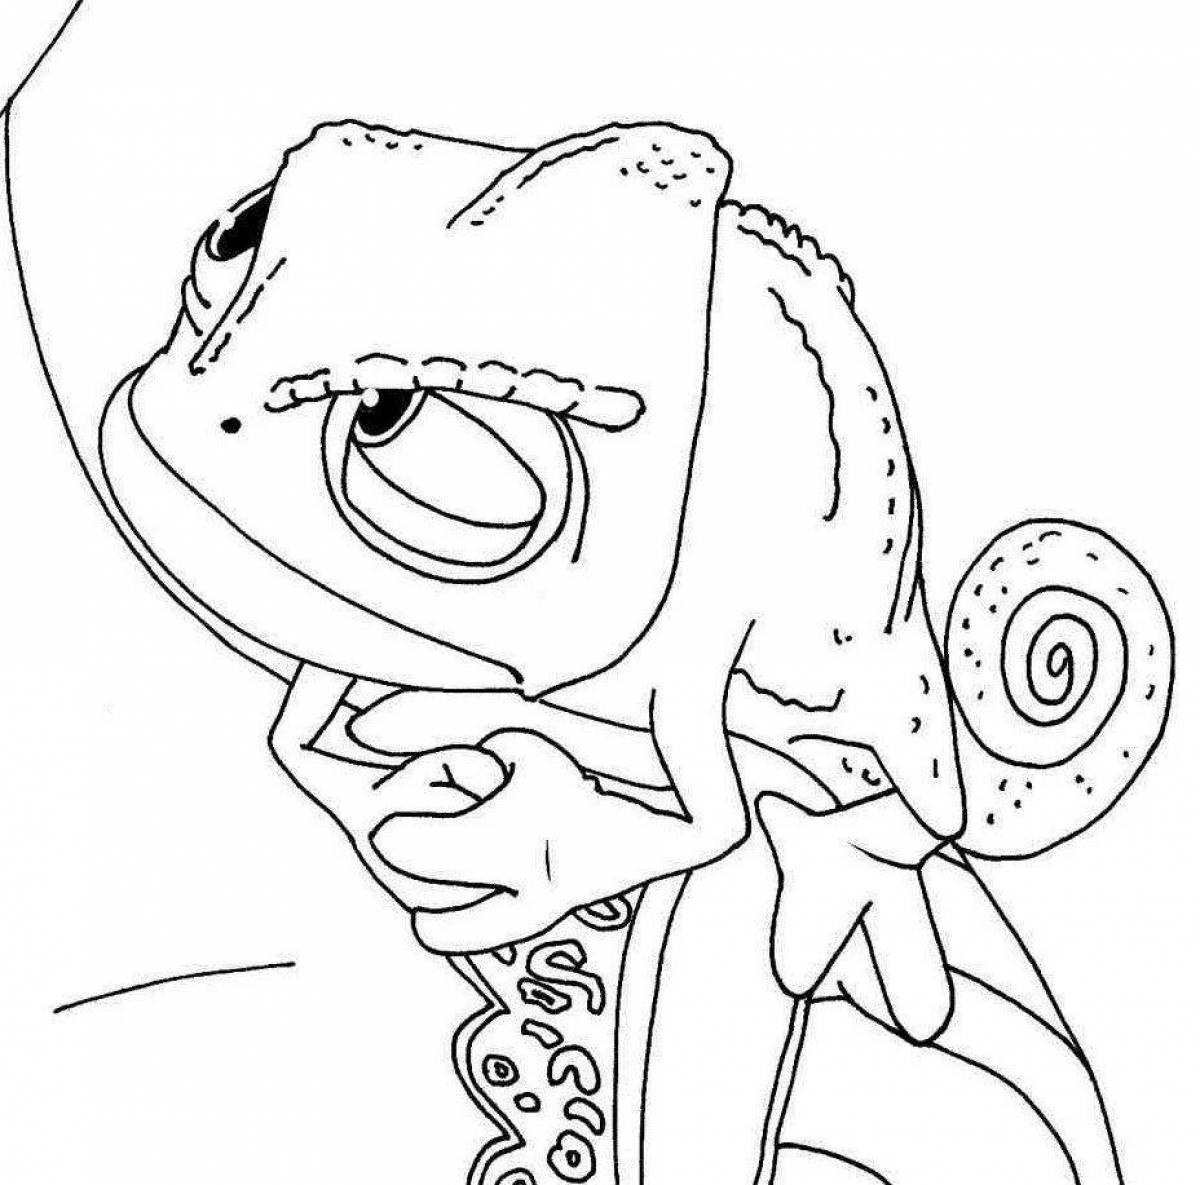 Delightful pascal coloring book